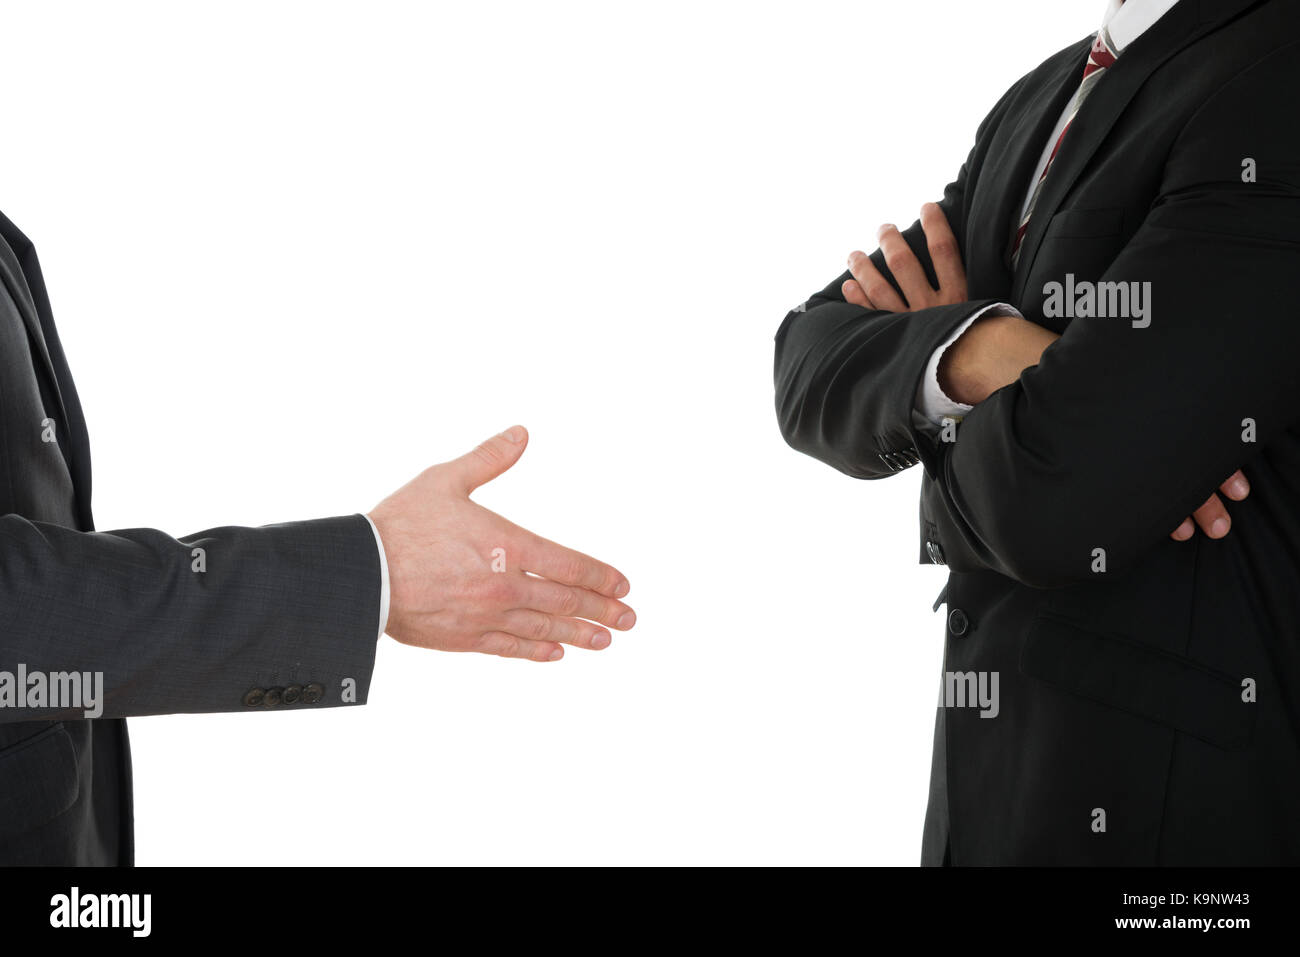 Person Offering Handshake To Businessman With Arm Crossed Over White Background Stock Photo